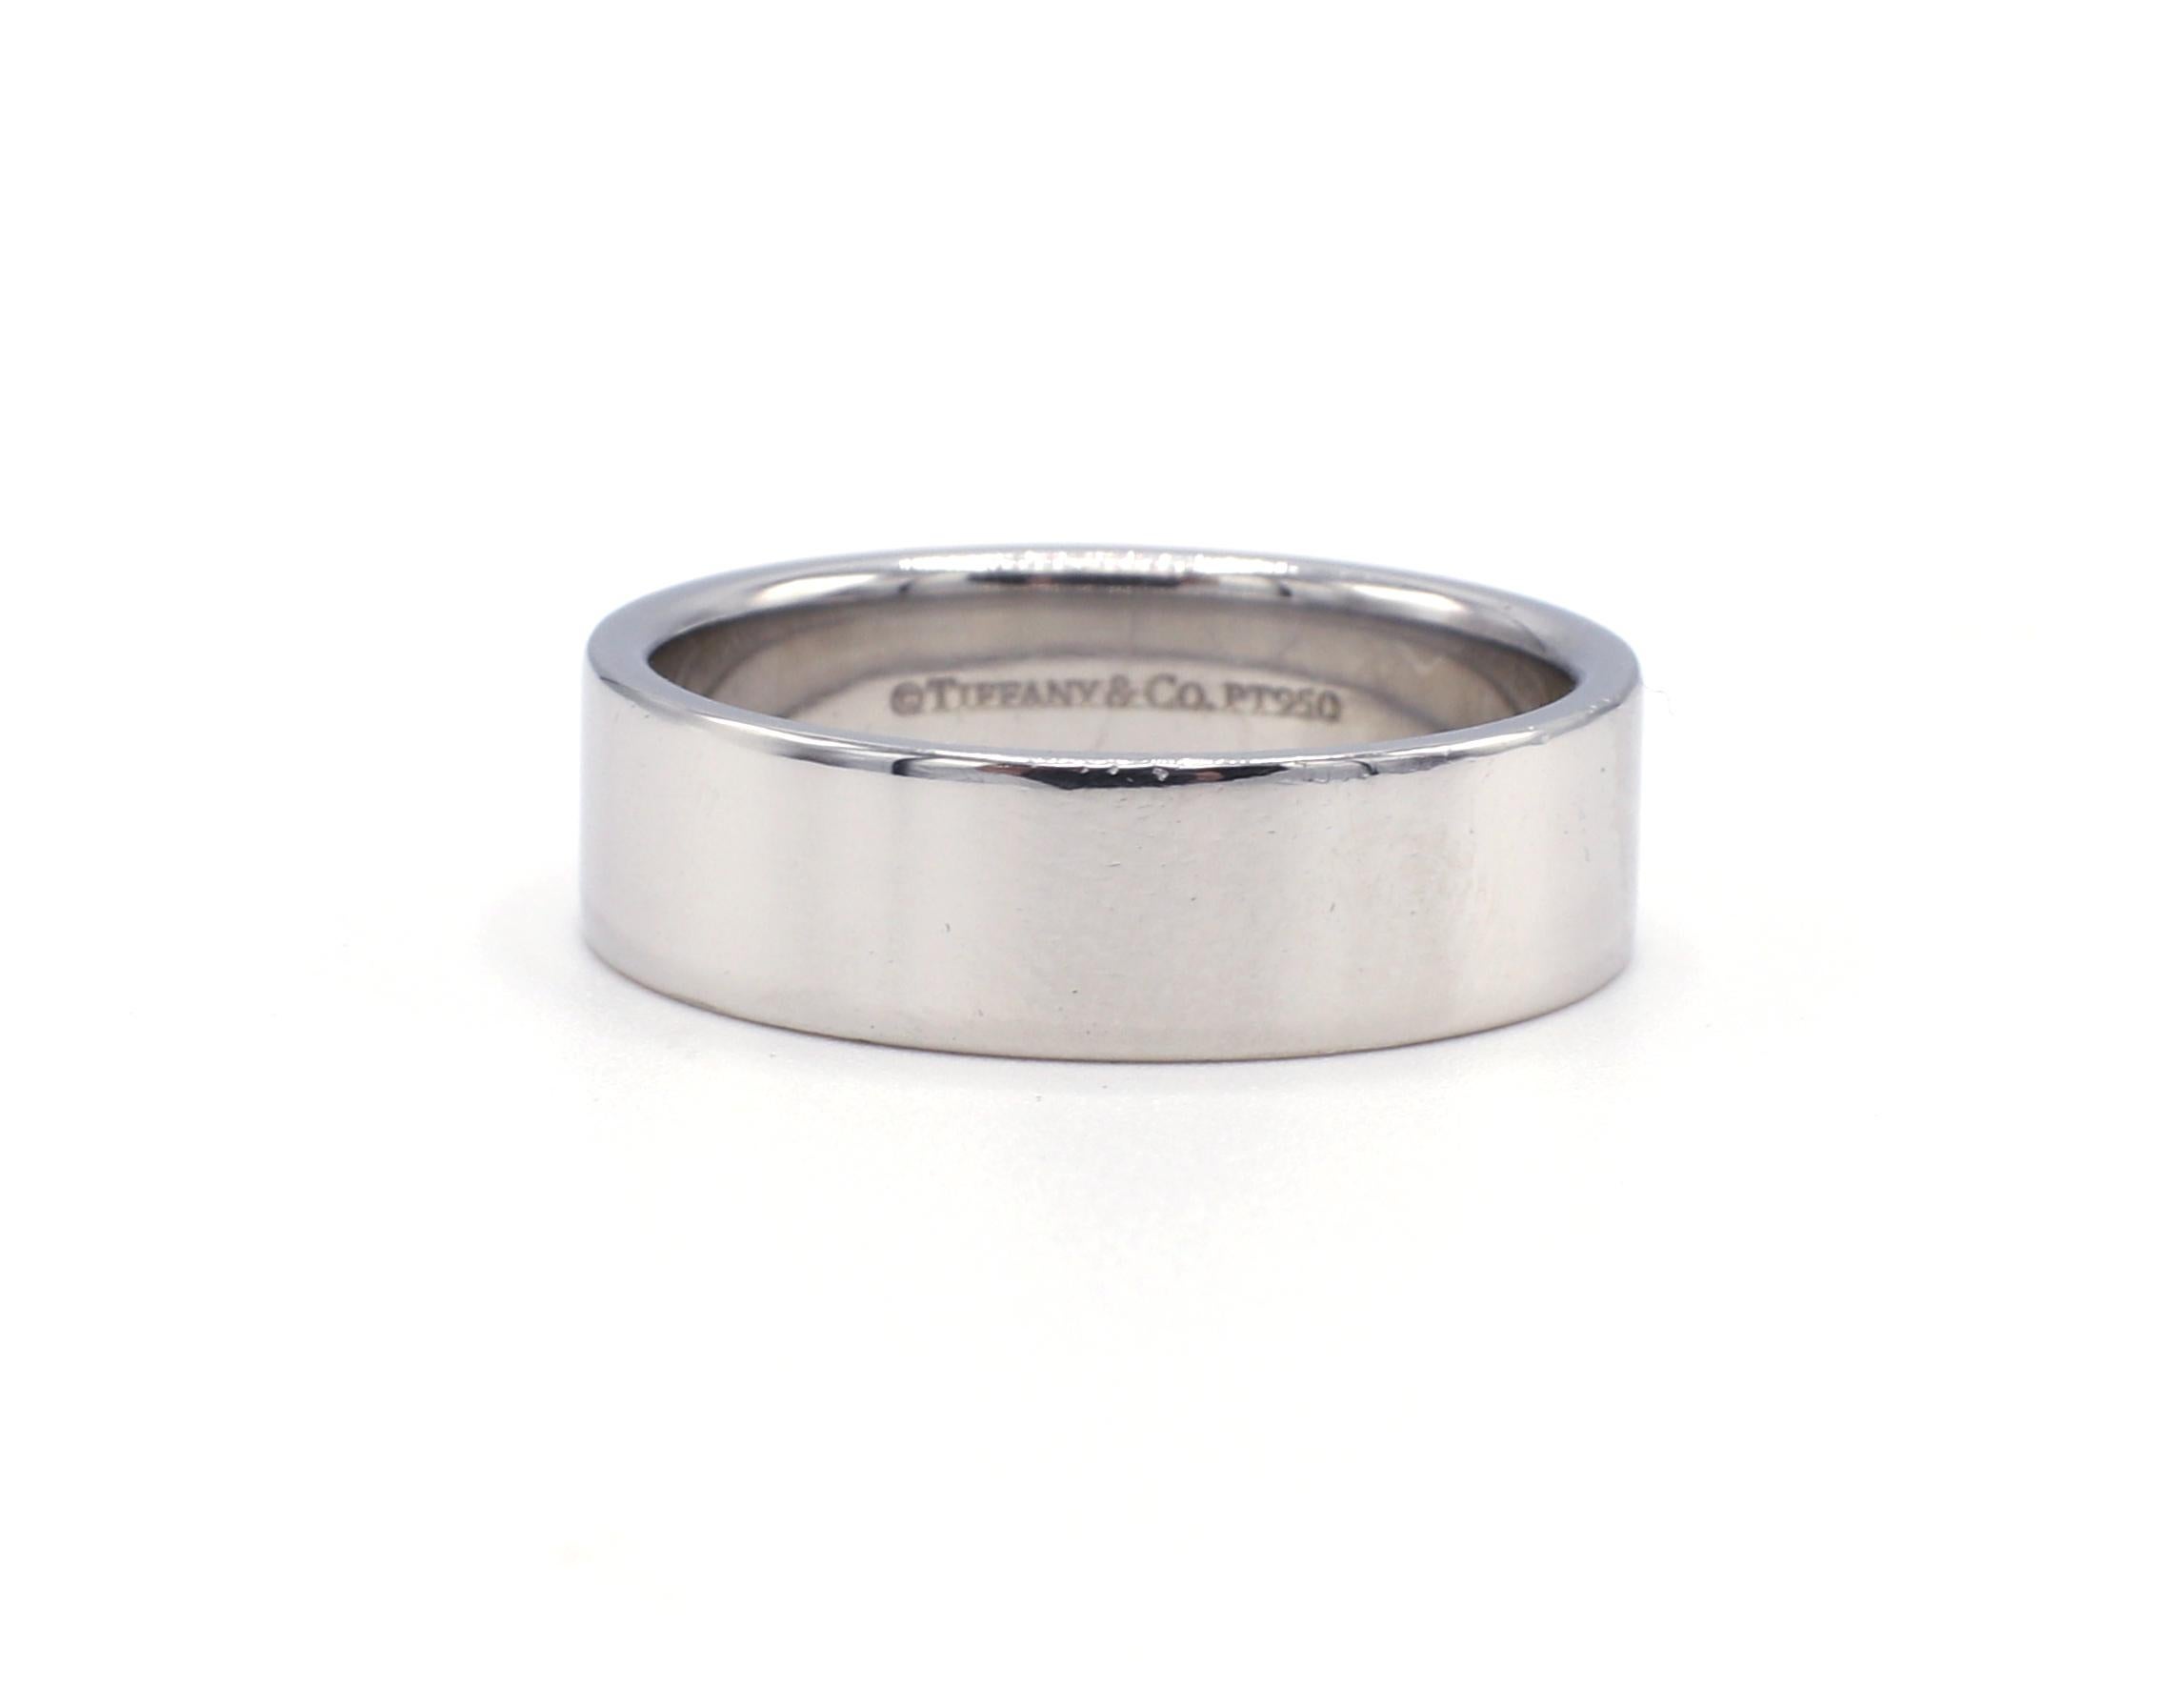 Tiffany & Co. Essential Platinum 6mm Wedding Band Ring

Metal: Platinum
Weight: 11.7 grams
Width: 6mm
Signed: Tiffany & Co. PT950
Retail: $2,550 USD